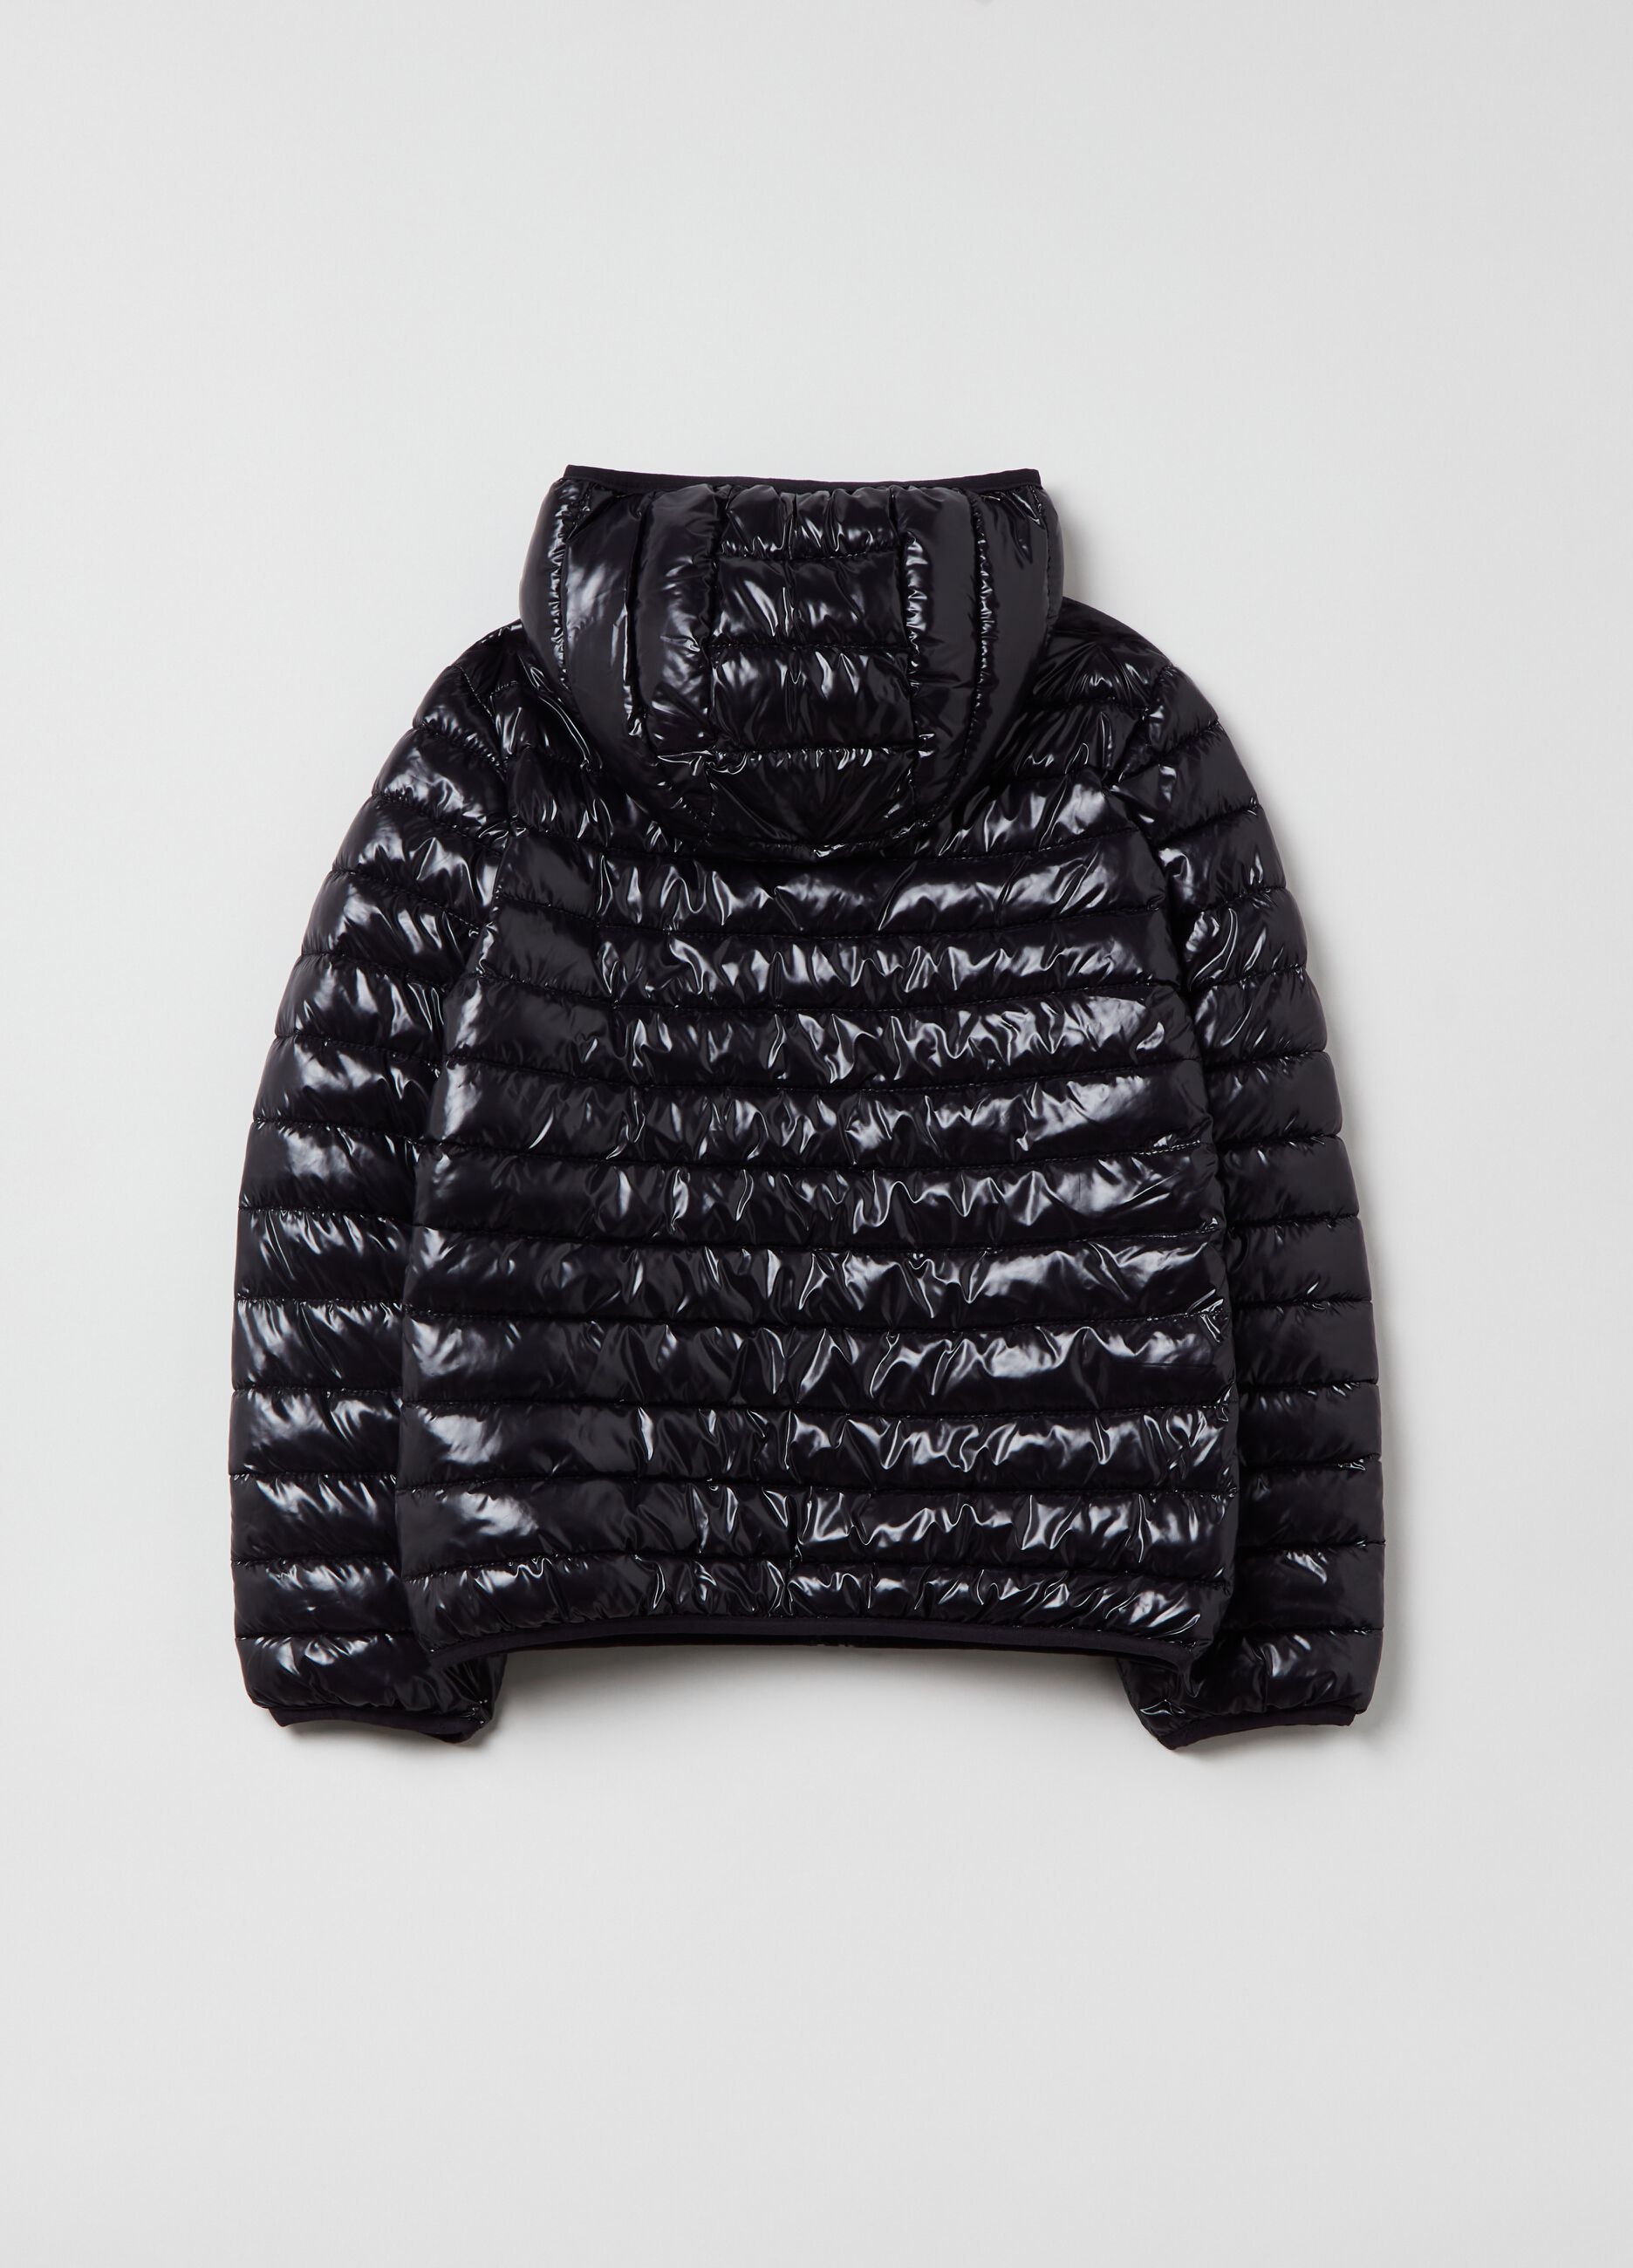 Ultralight quilted down jacket with hood